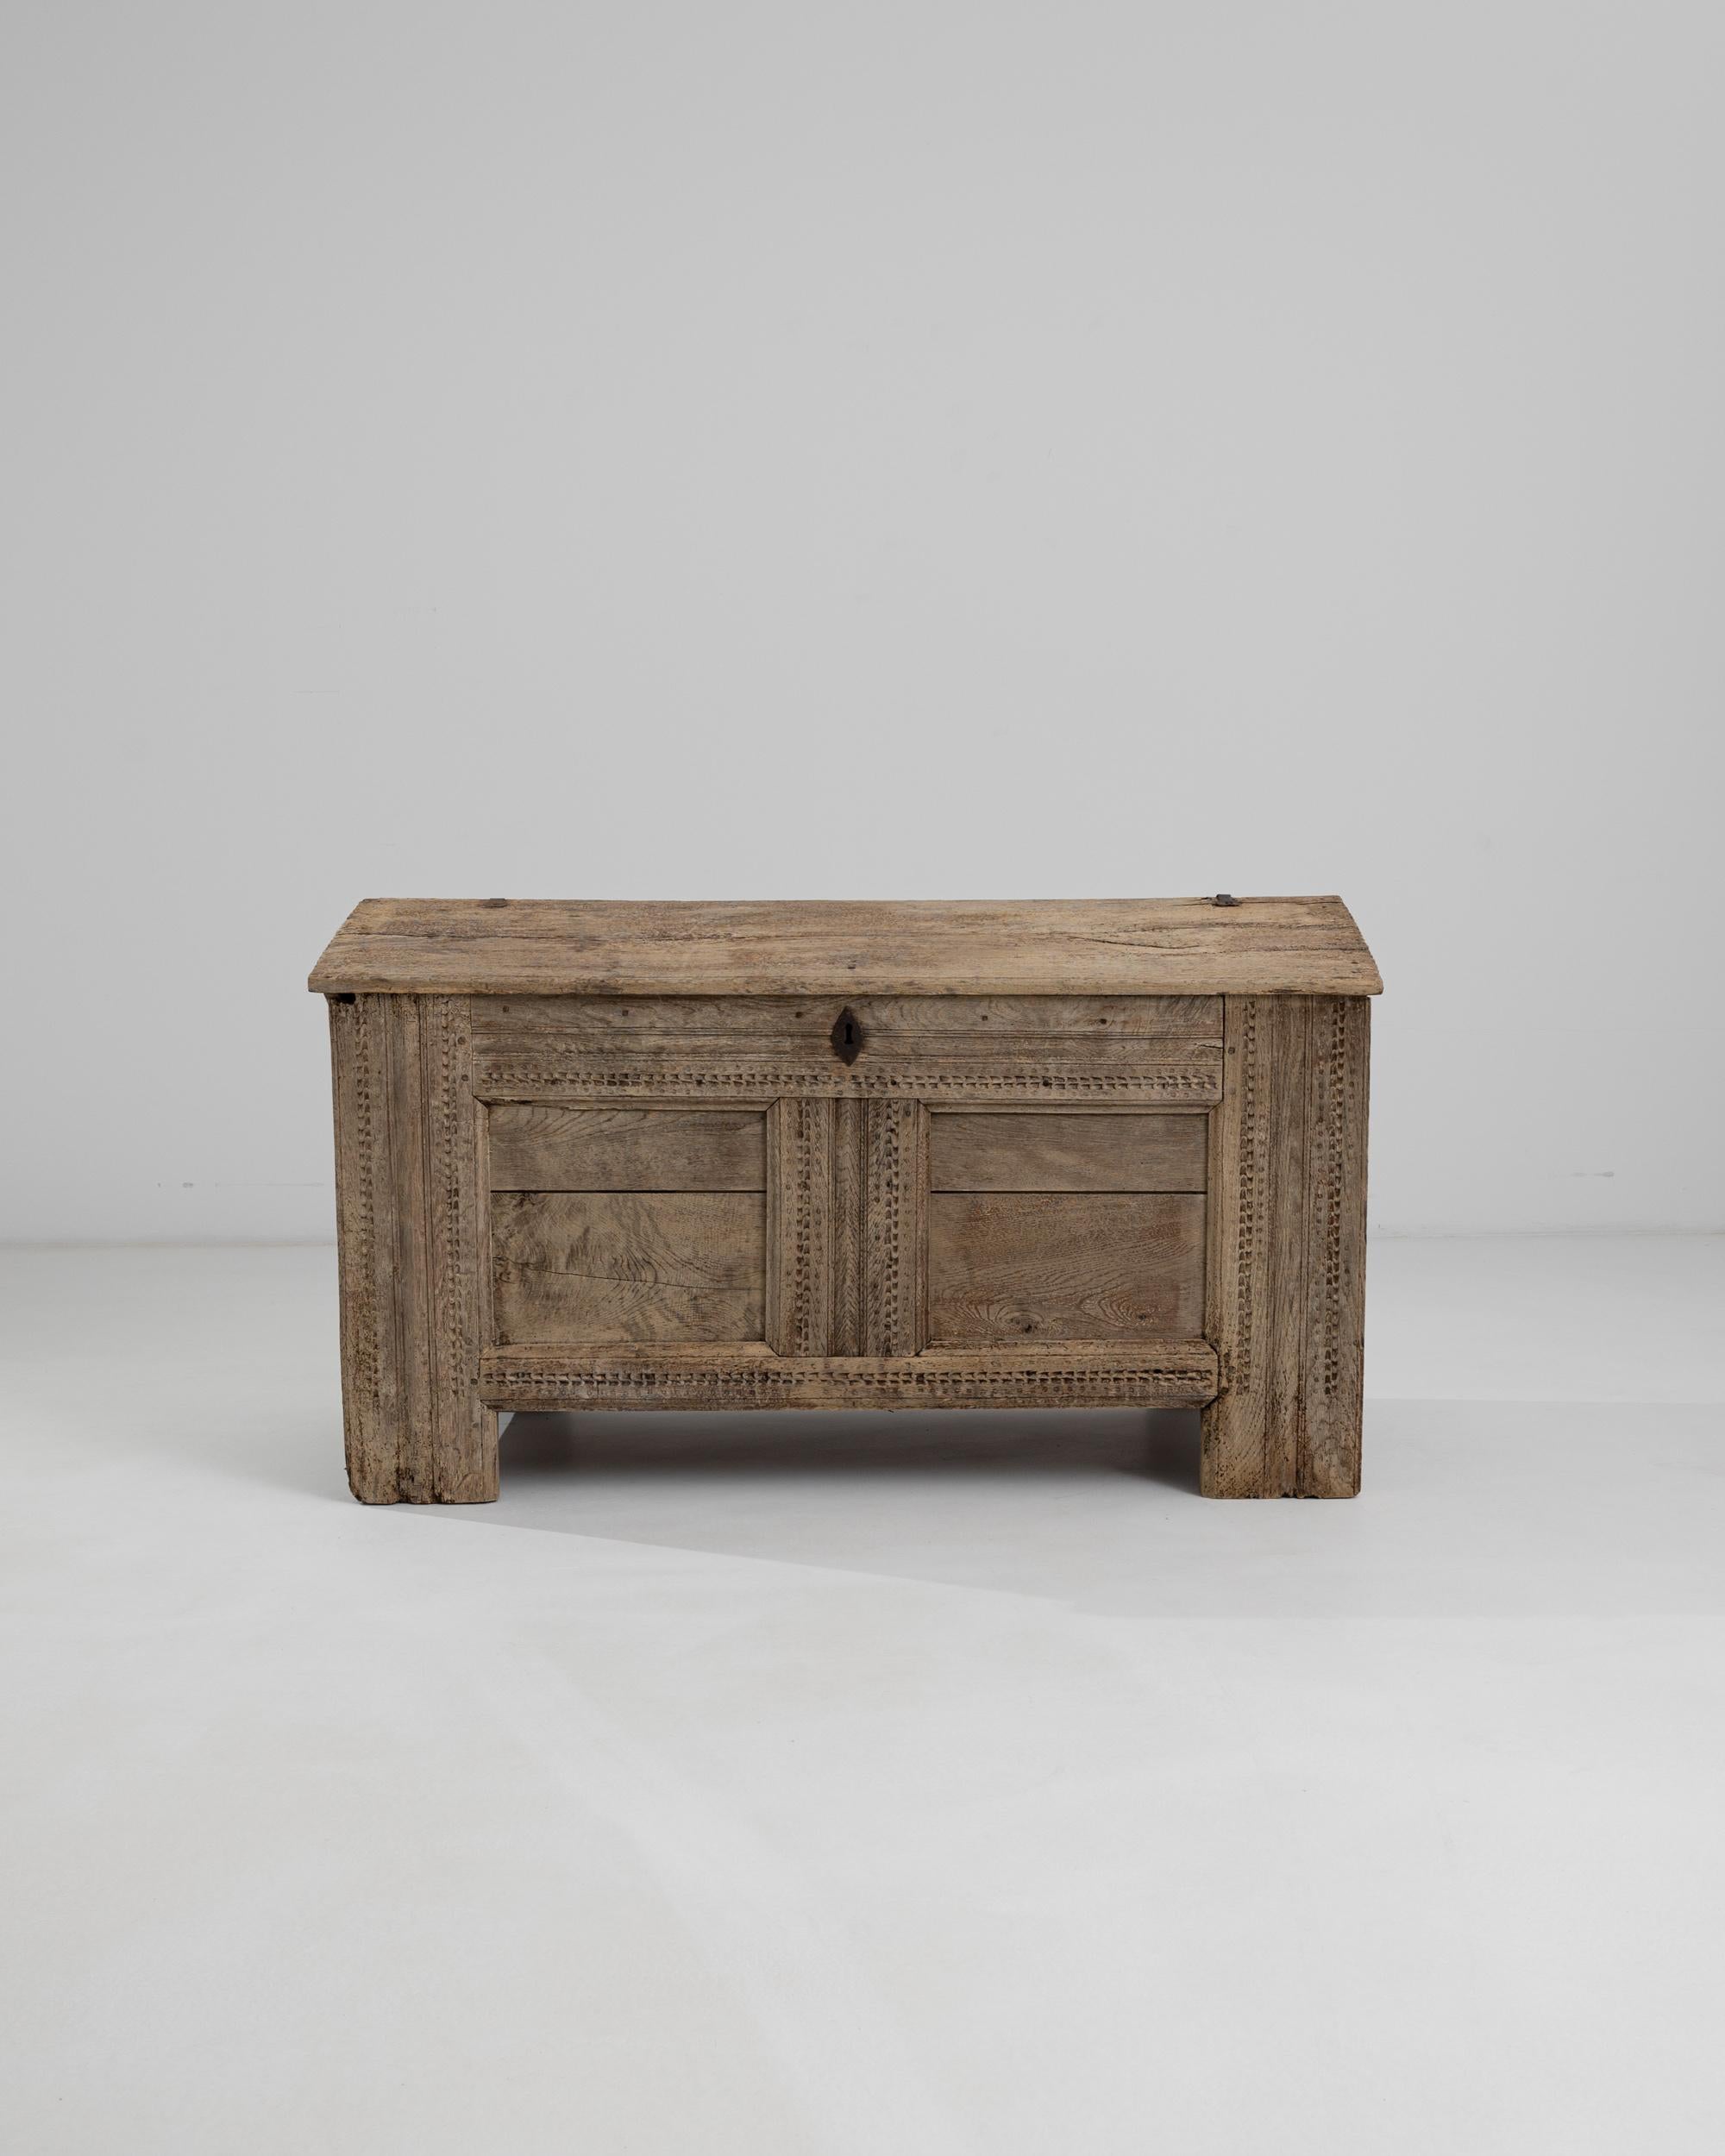 This gothic trunk in natural oak offers a unique antique accent. Made in Germany in the 1700s, the peaked lid gives the piece an architectural quality, reminiscent of ancient dwellings such as Viking longhouses; the subtle carved edges of the lid